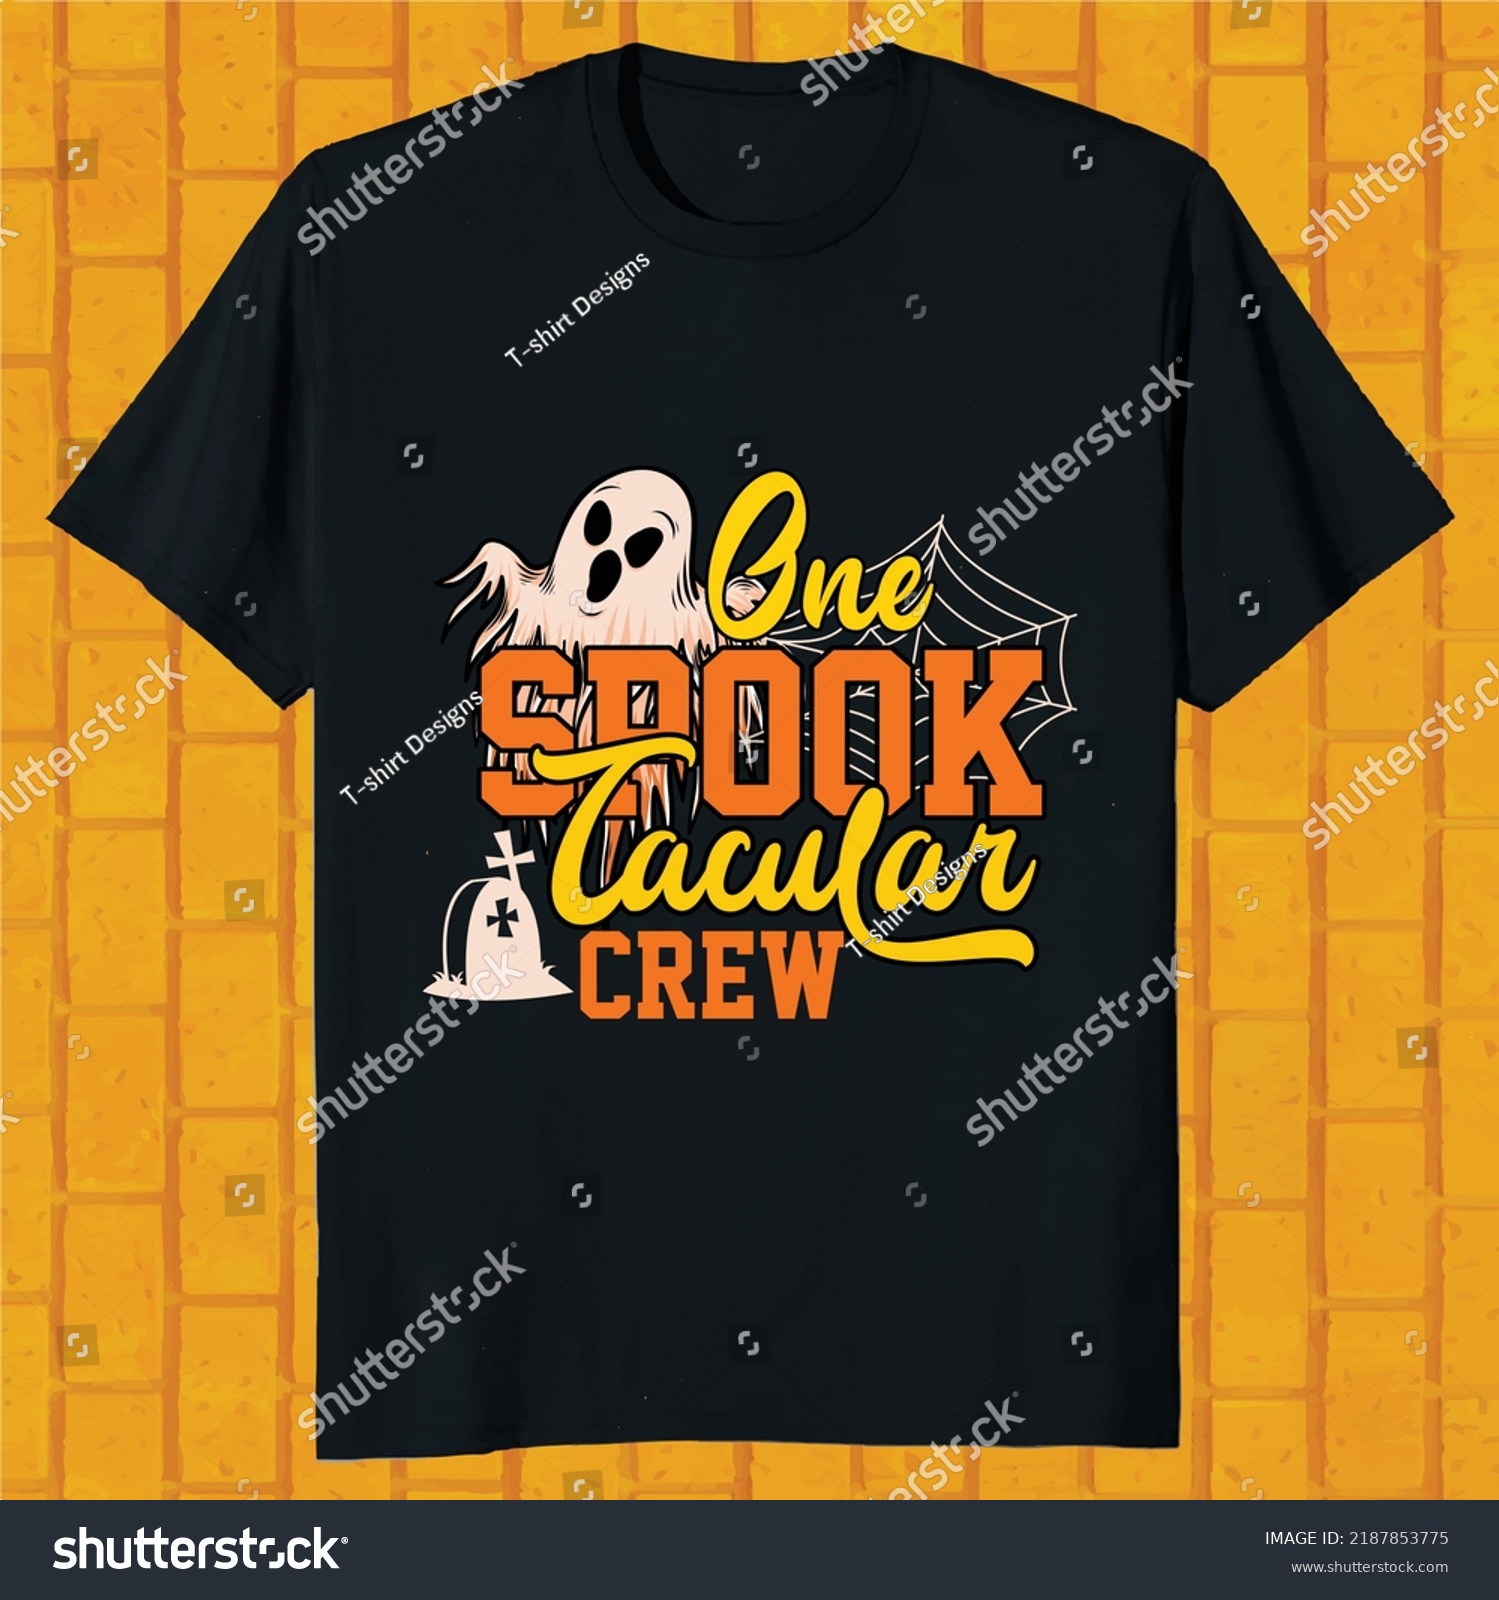 SVG of one spook tacular crew hello ween t-shirt design svg